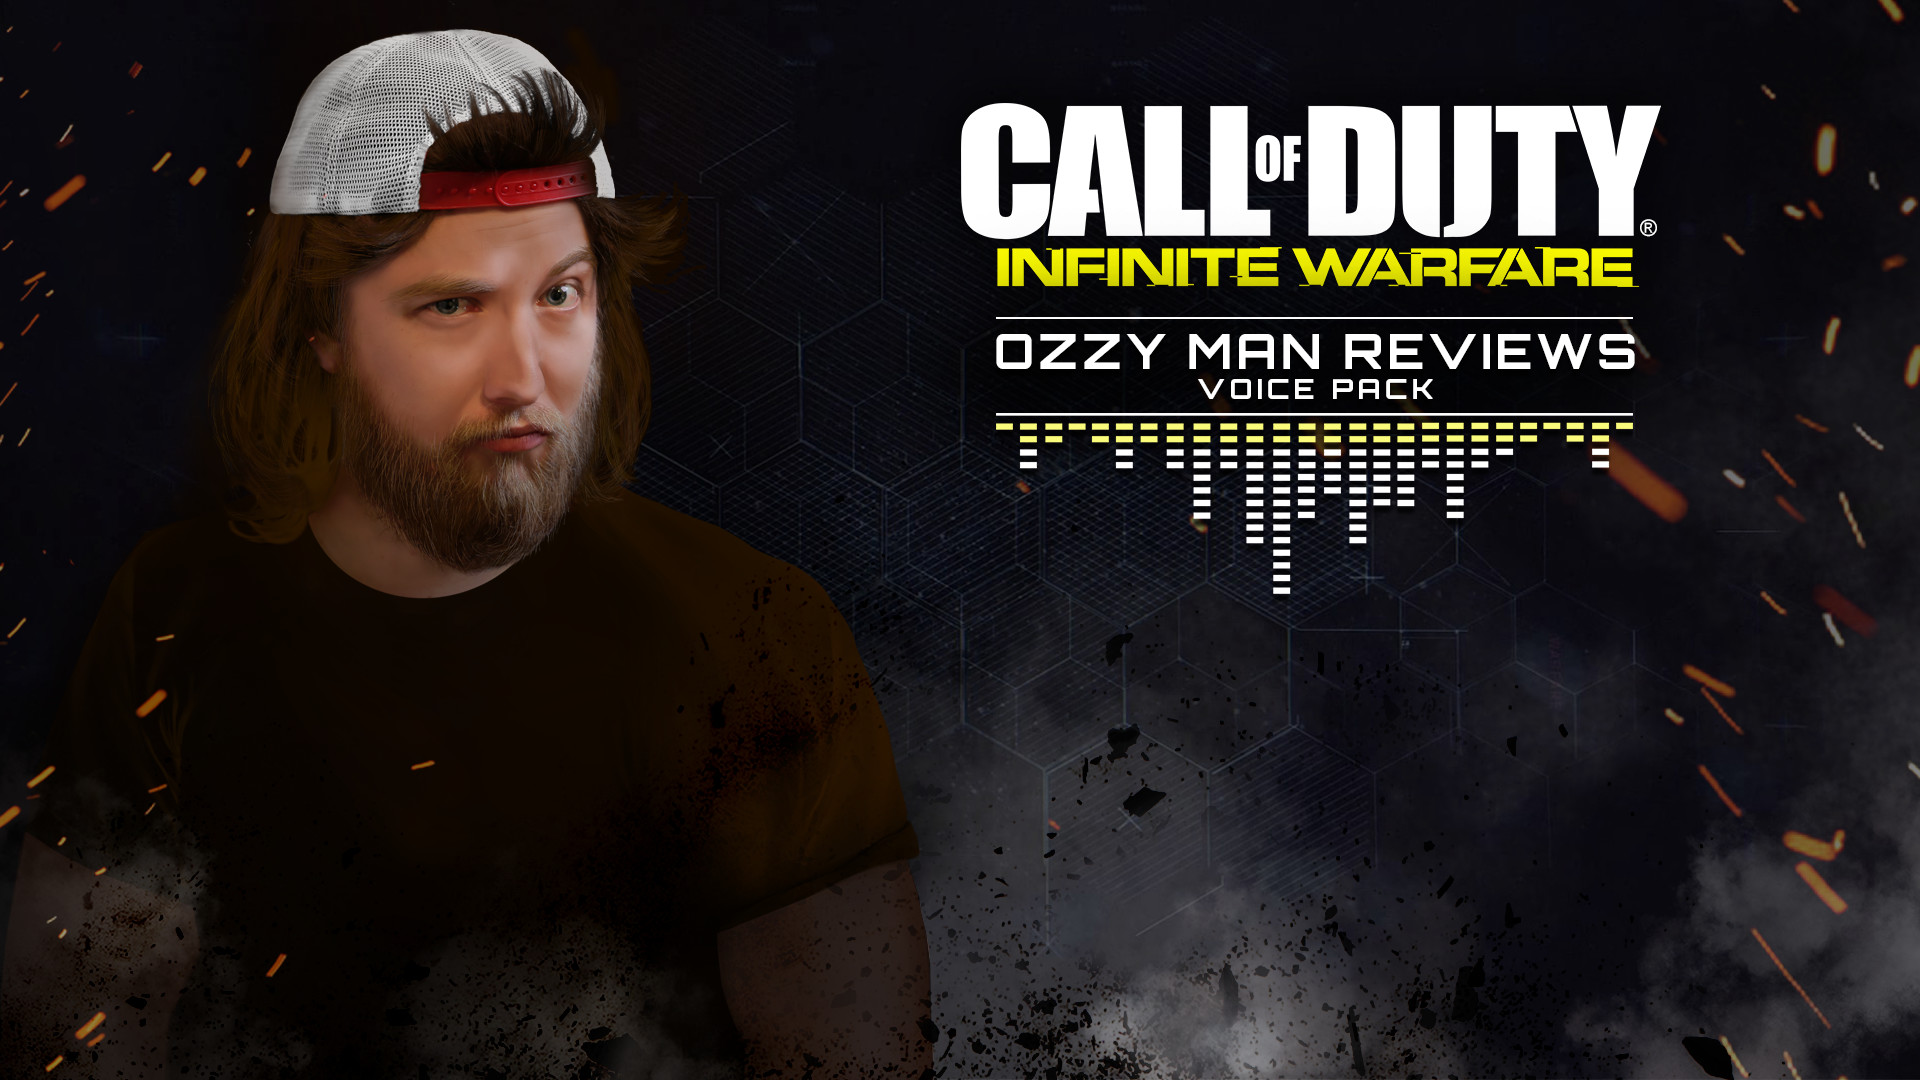 Call of Duty®: Infinite Warfare - Ozzy Man Reviews VO Pack Featured Screenshot #1